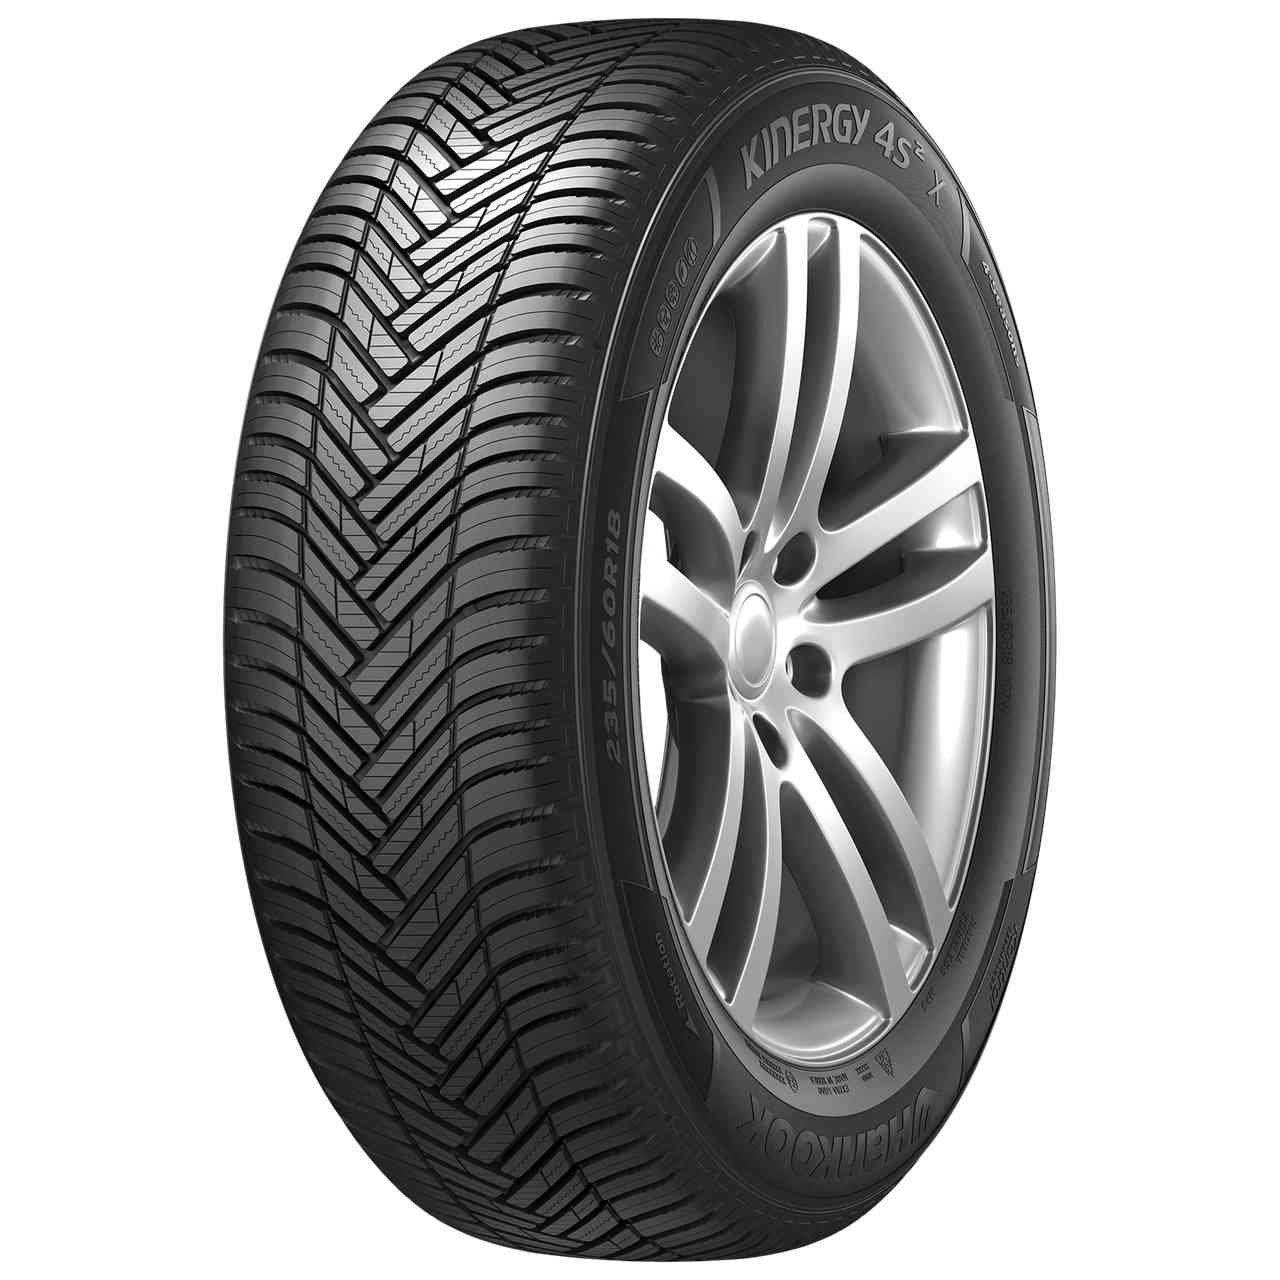 HANKOOK KINERGY 4S 2 X (H750A) 225/60R17 103V BSW